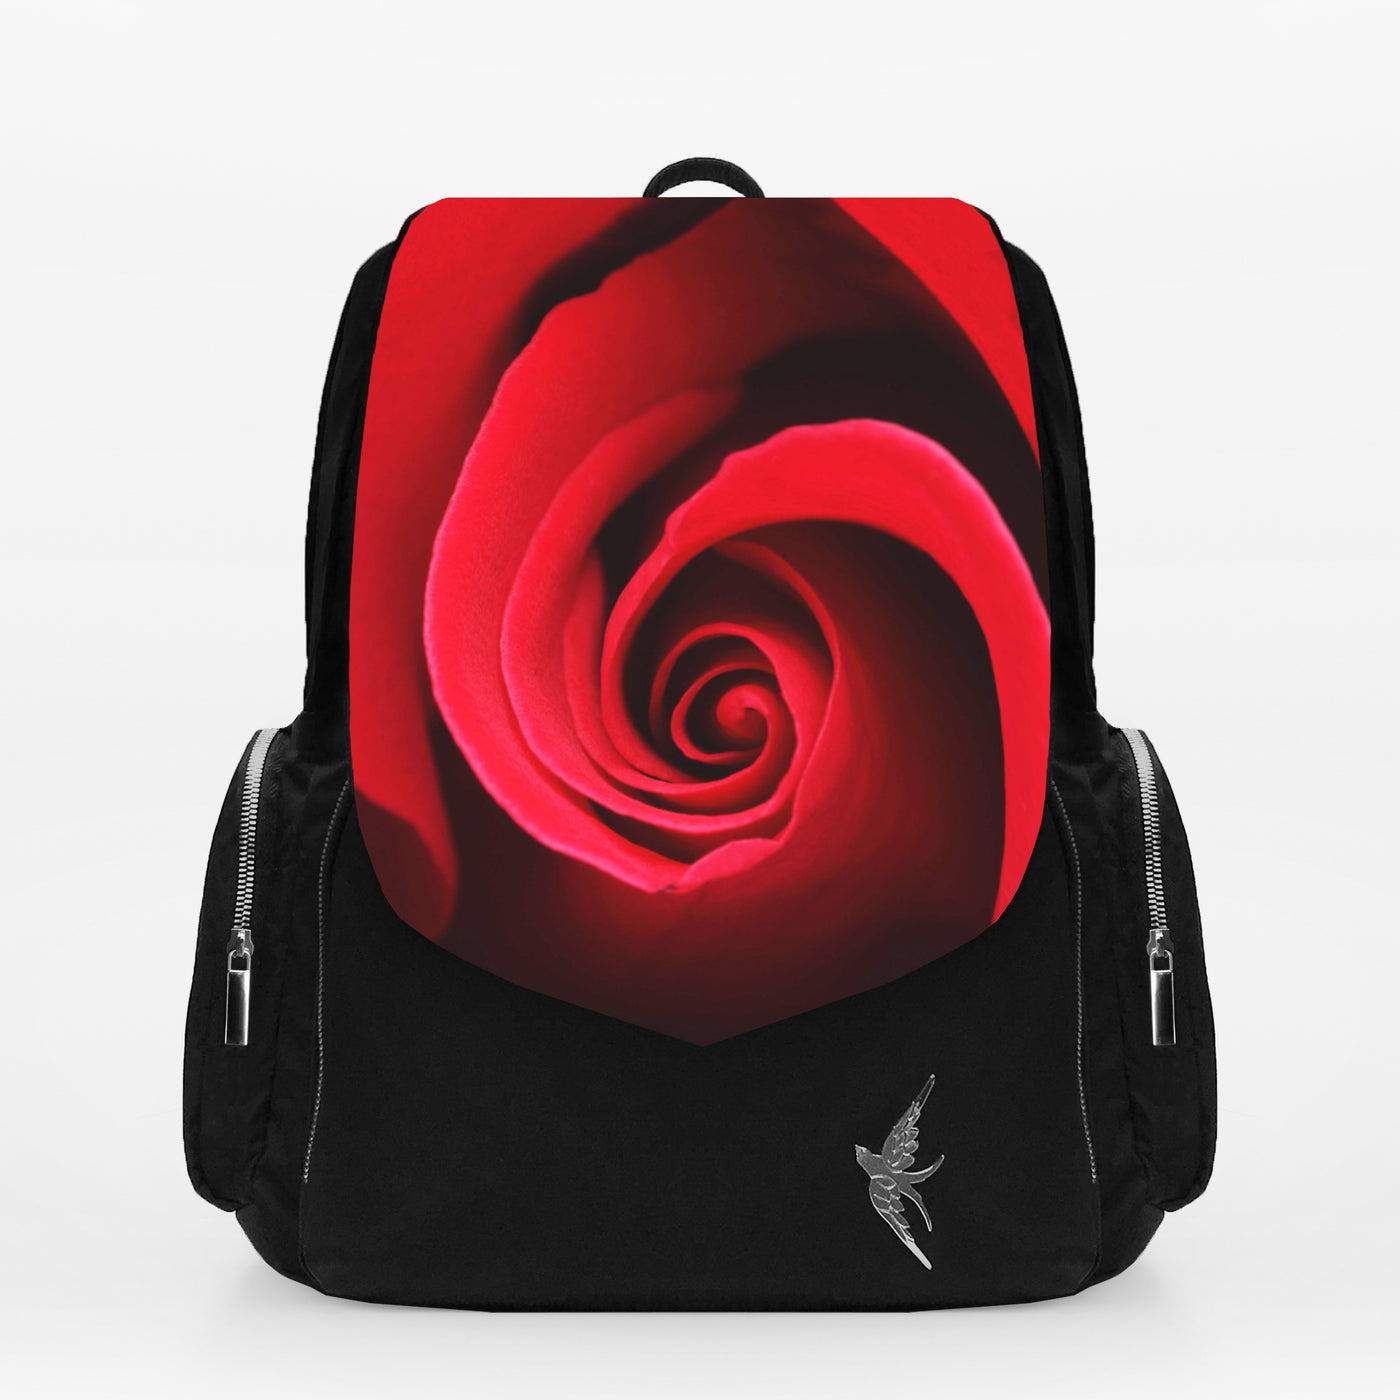 Laptop Backpack with the Modern Rose Print